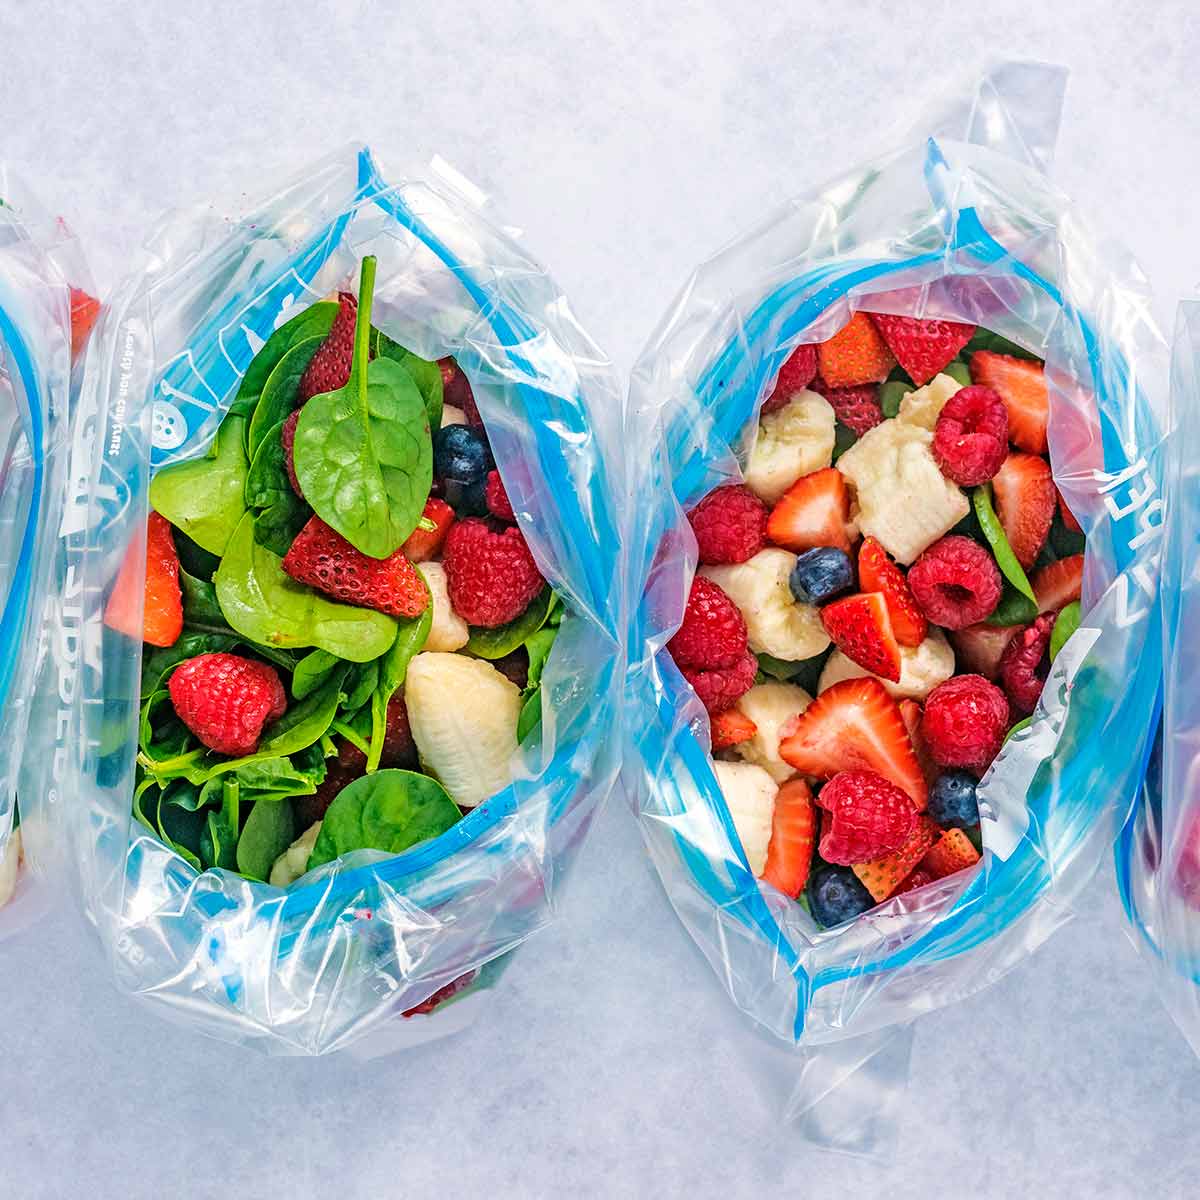 Frozen Smoothie Packs - The Complete Guide